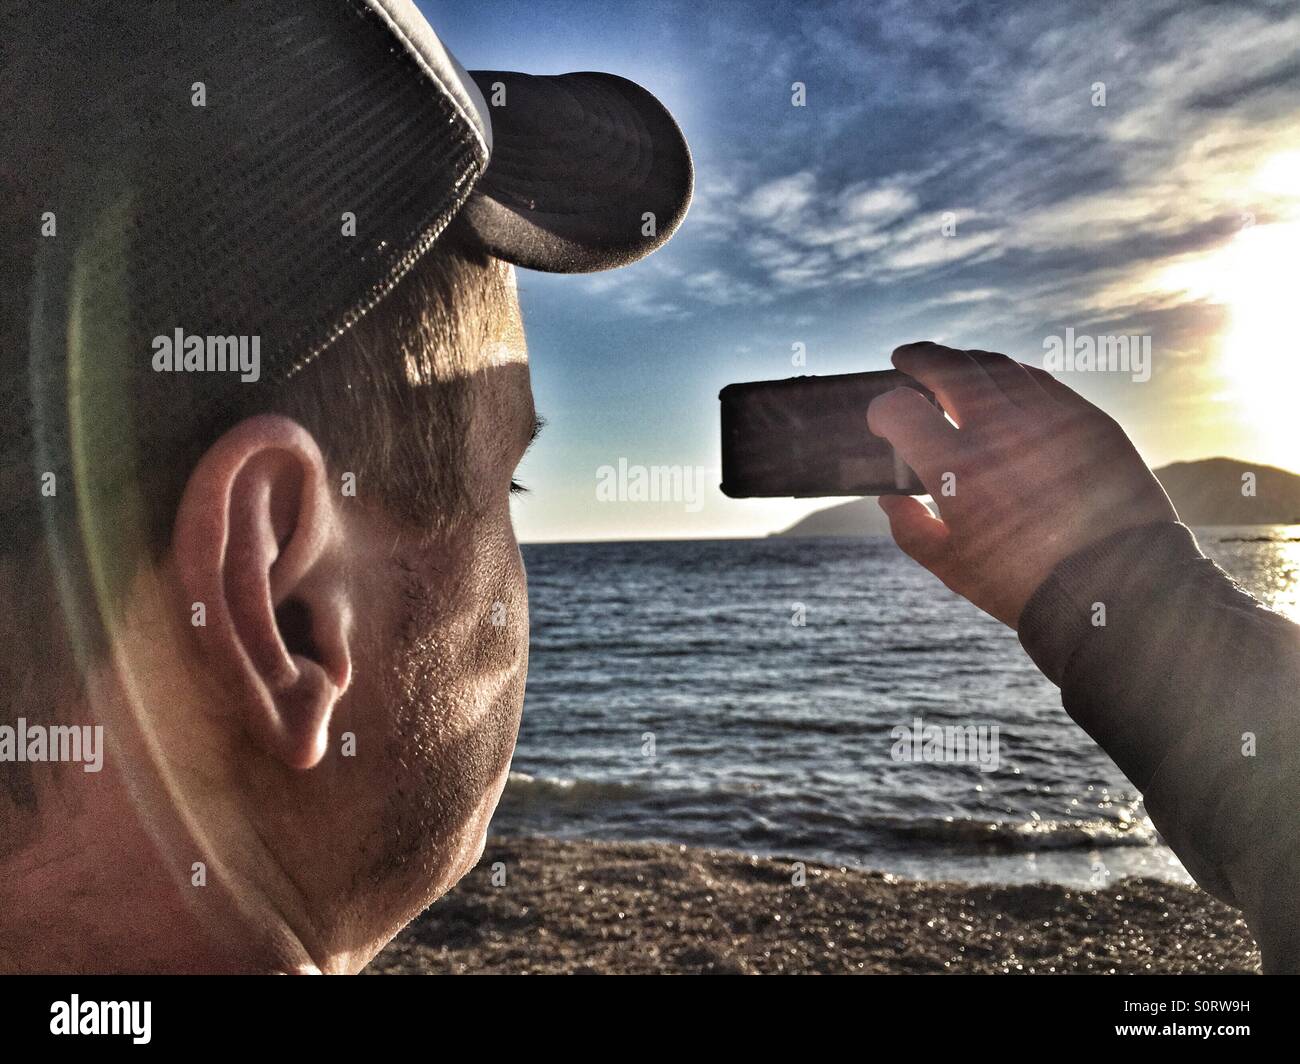 Man taking a photo with an iPhone Stock Photo